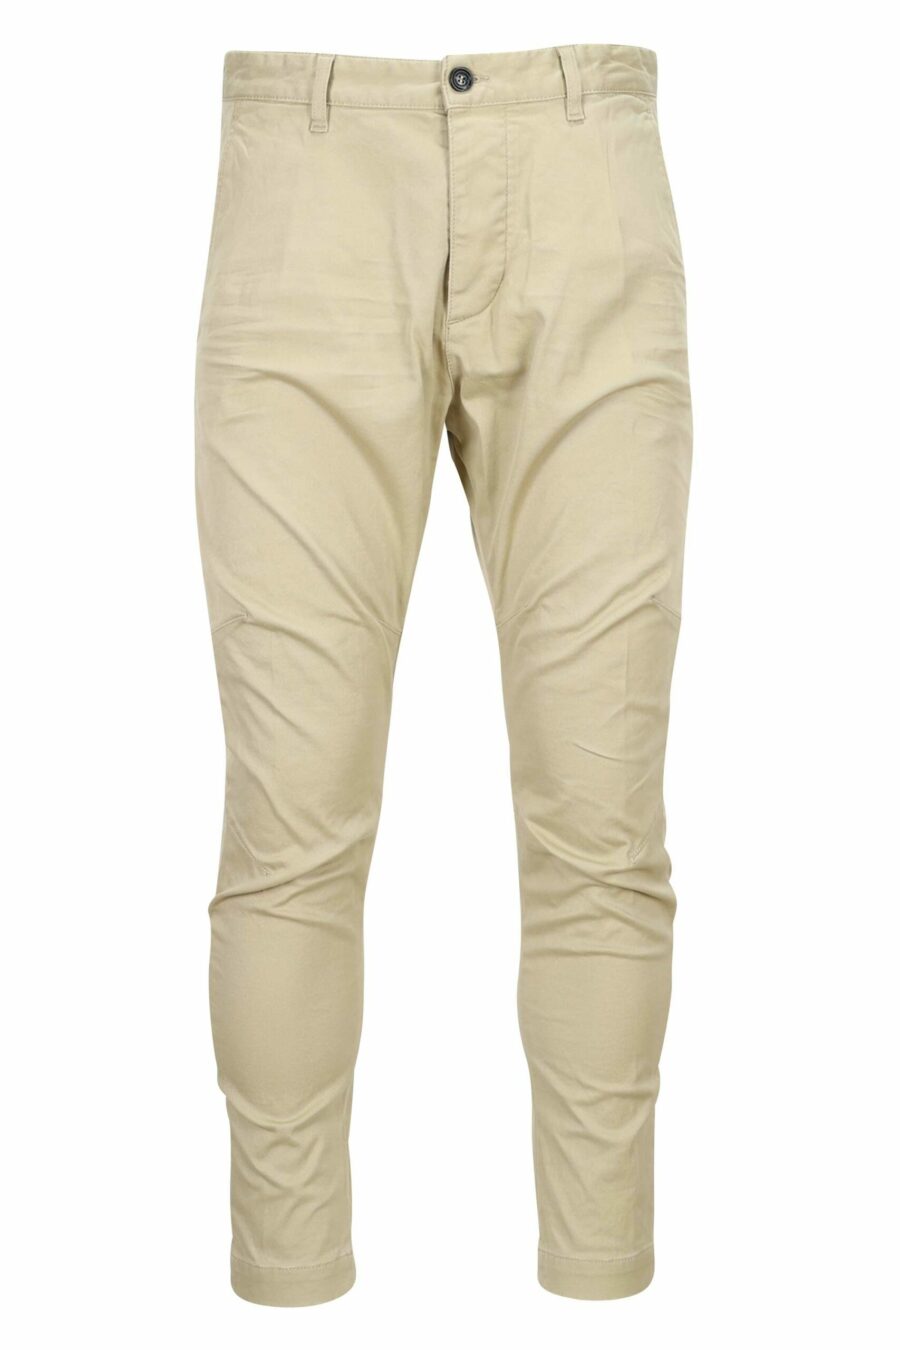 Beige "sexy chino pant" with mini-logo - 8052134973257 scaled